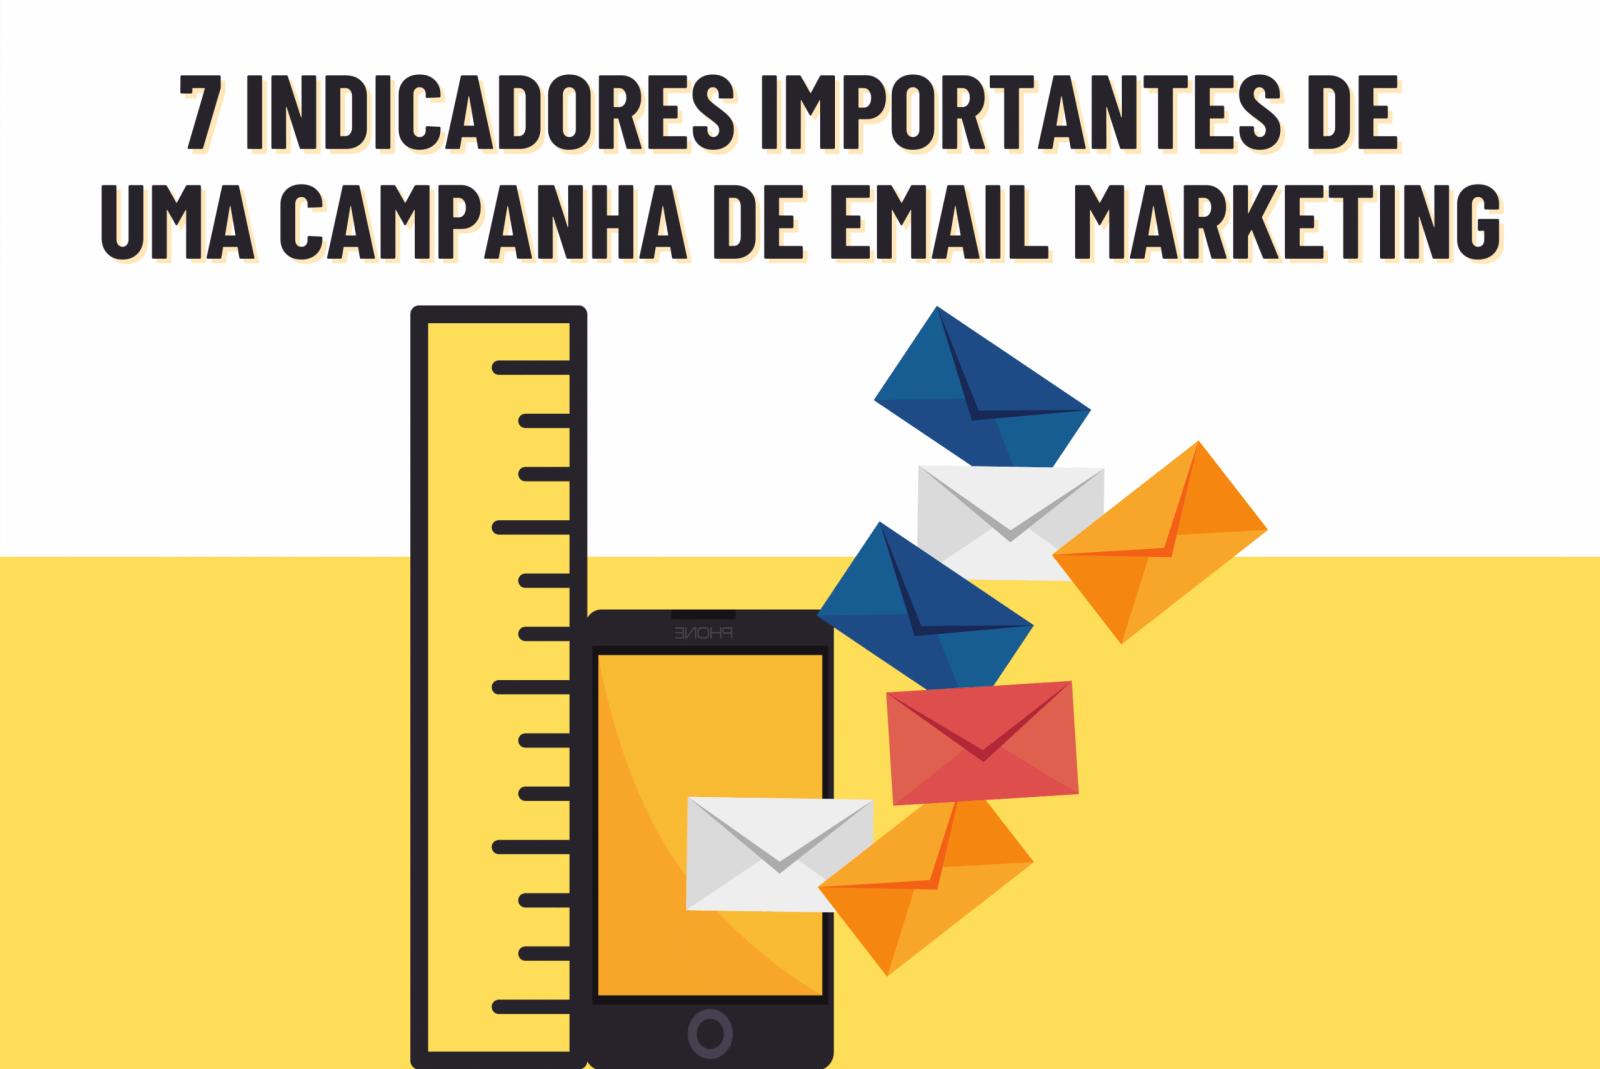 EMAIL MARKETING 11